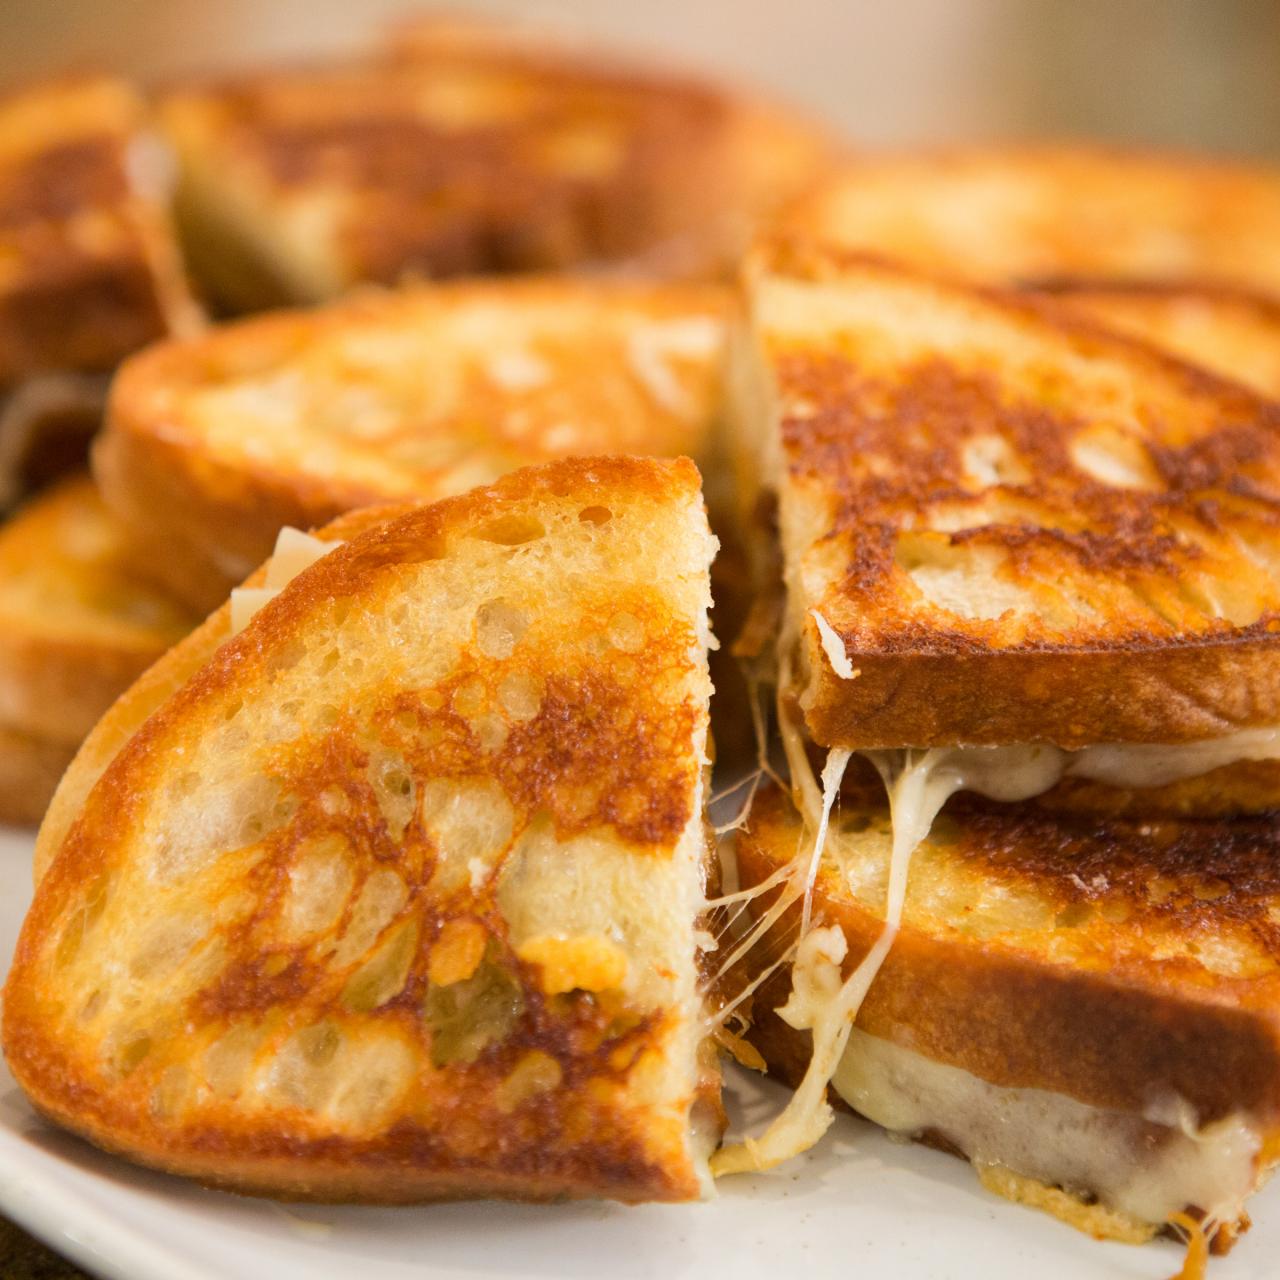 https://food.fnr.sndimg.com/content/dam/images/food/fullset/2015/1/17/0/CCTIF104_Grilled-Cheese-with-Caramelized-Onions-recipe_s4x3.jpg.rend.hgtvcom.1280.1280.suffix/1427496039756.jpeg